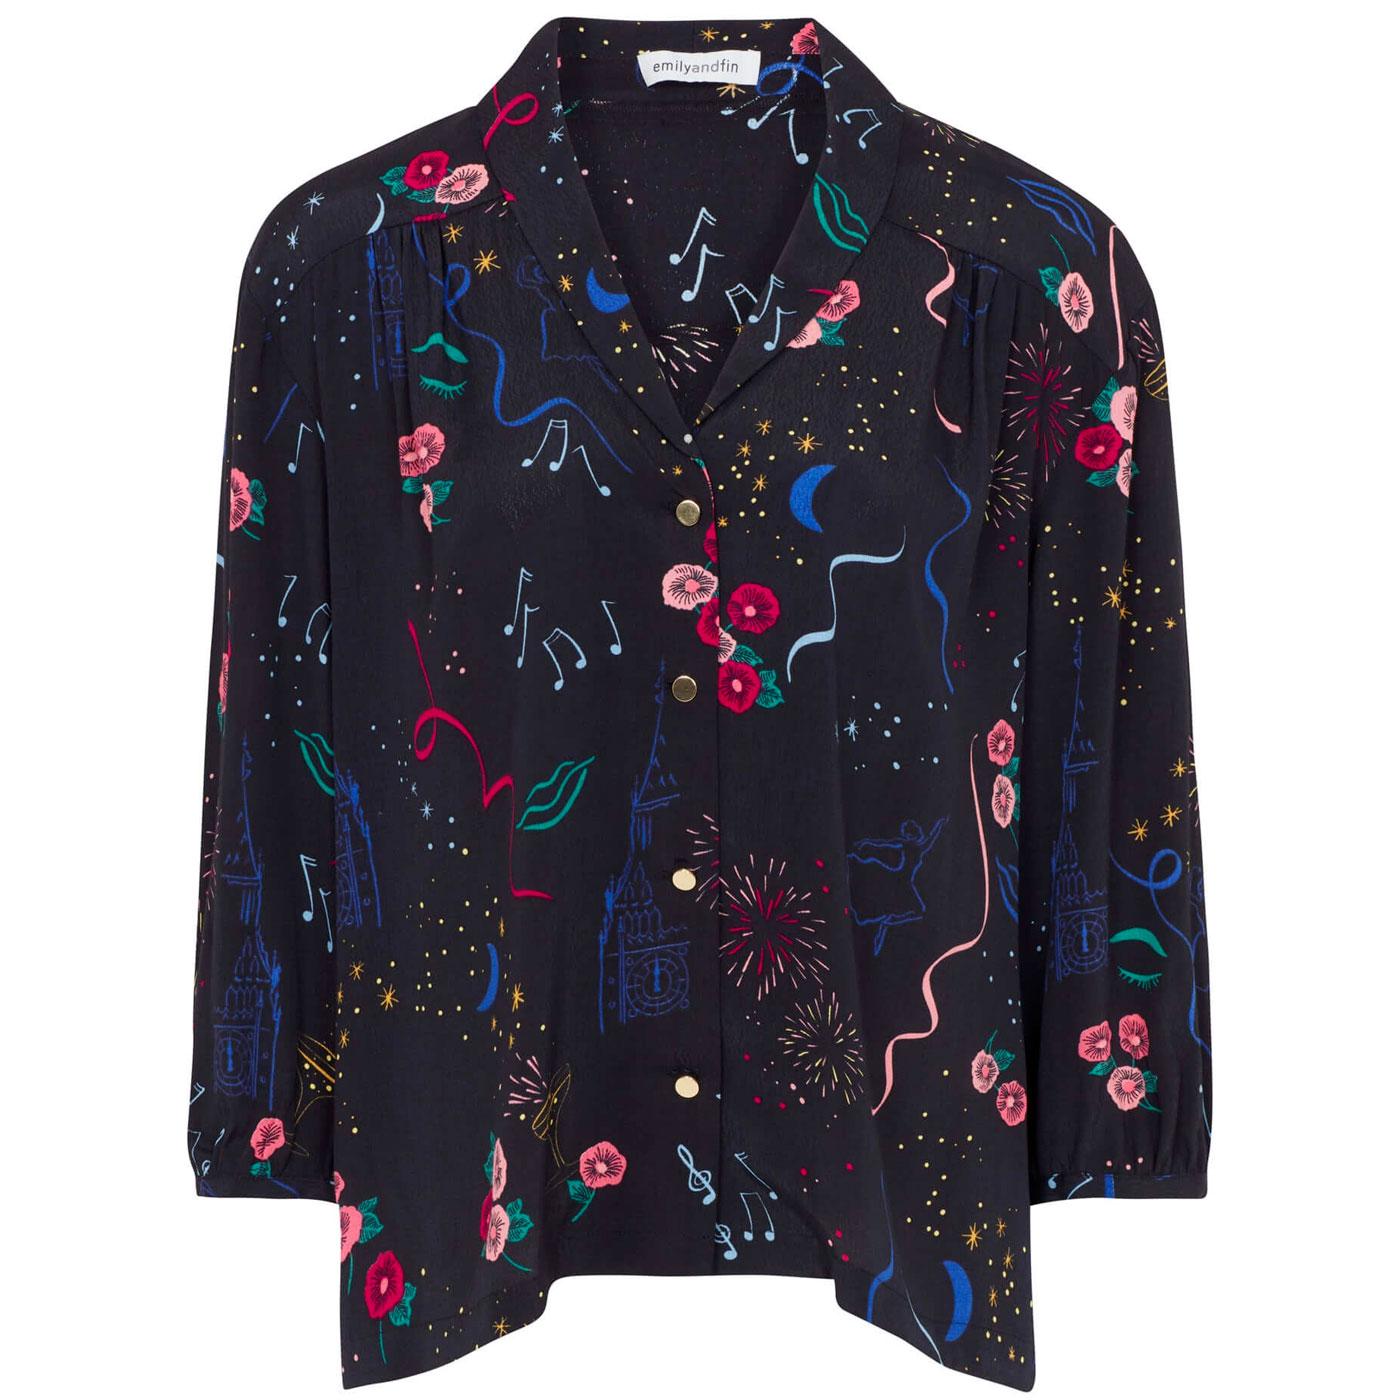 Florrie EMILY & FIN New Years Party Printed Blouse